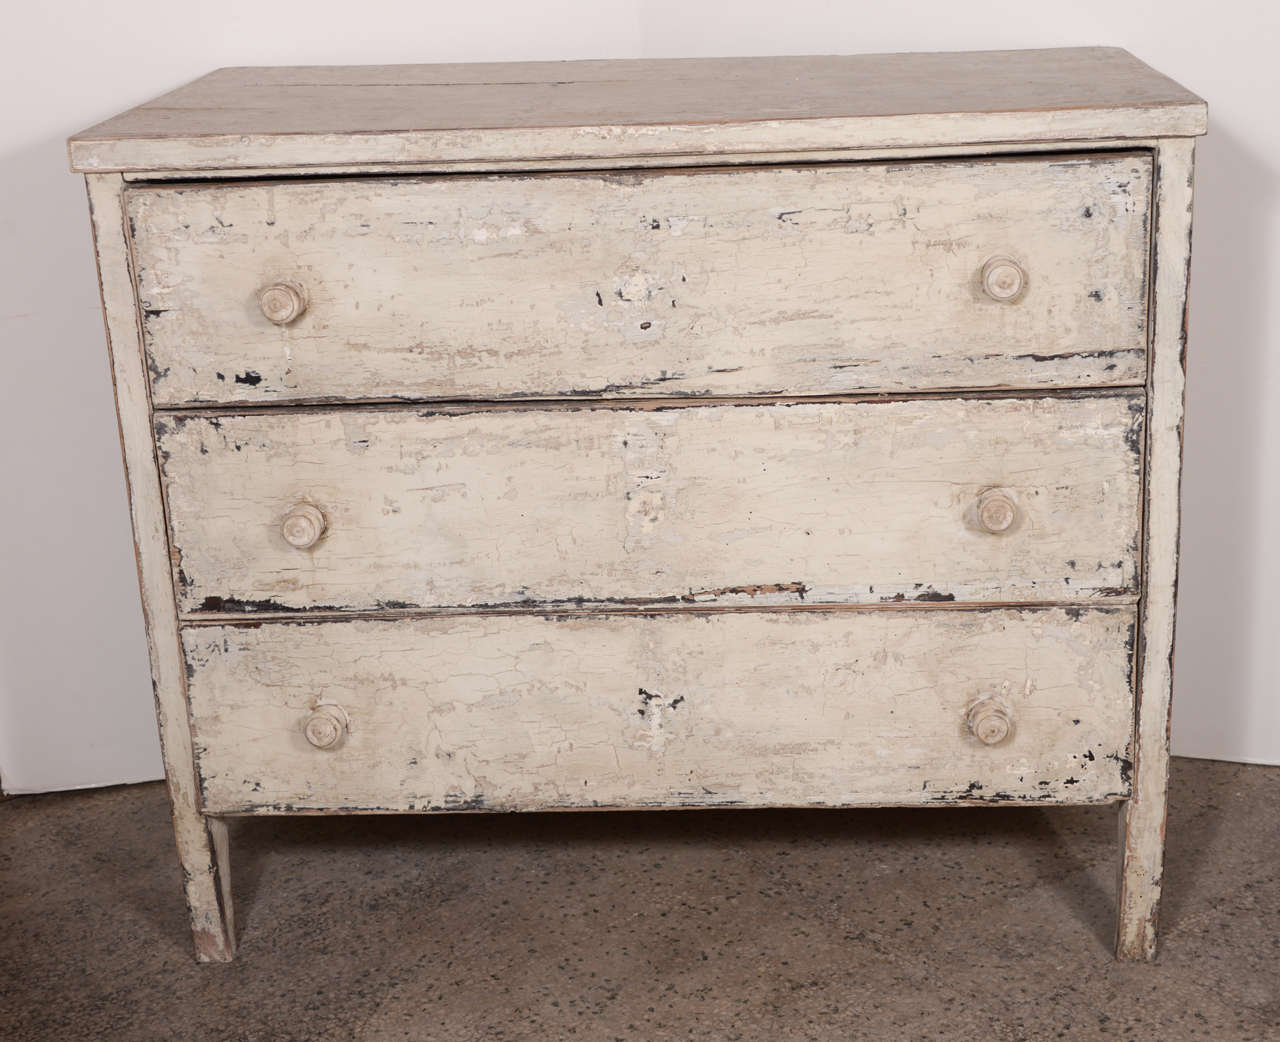 Pair of chests from Spain. Scraped painted finish. Perfect for bedside tables.